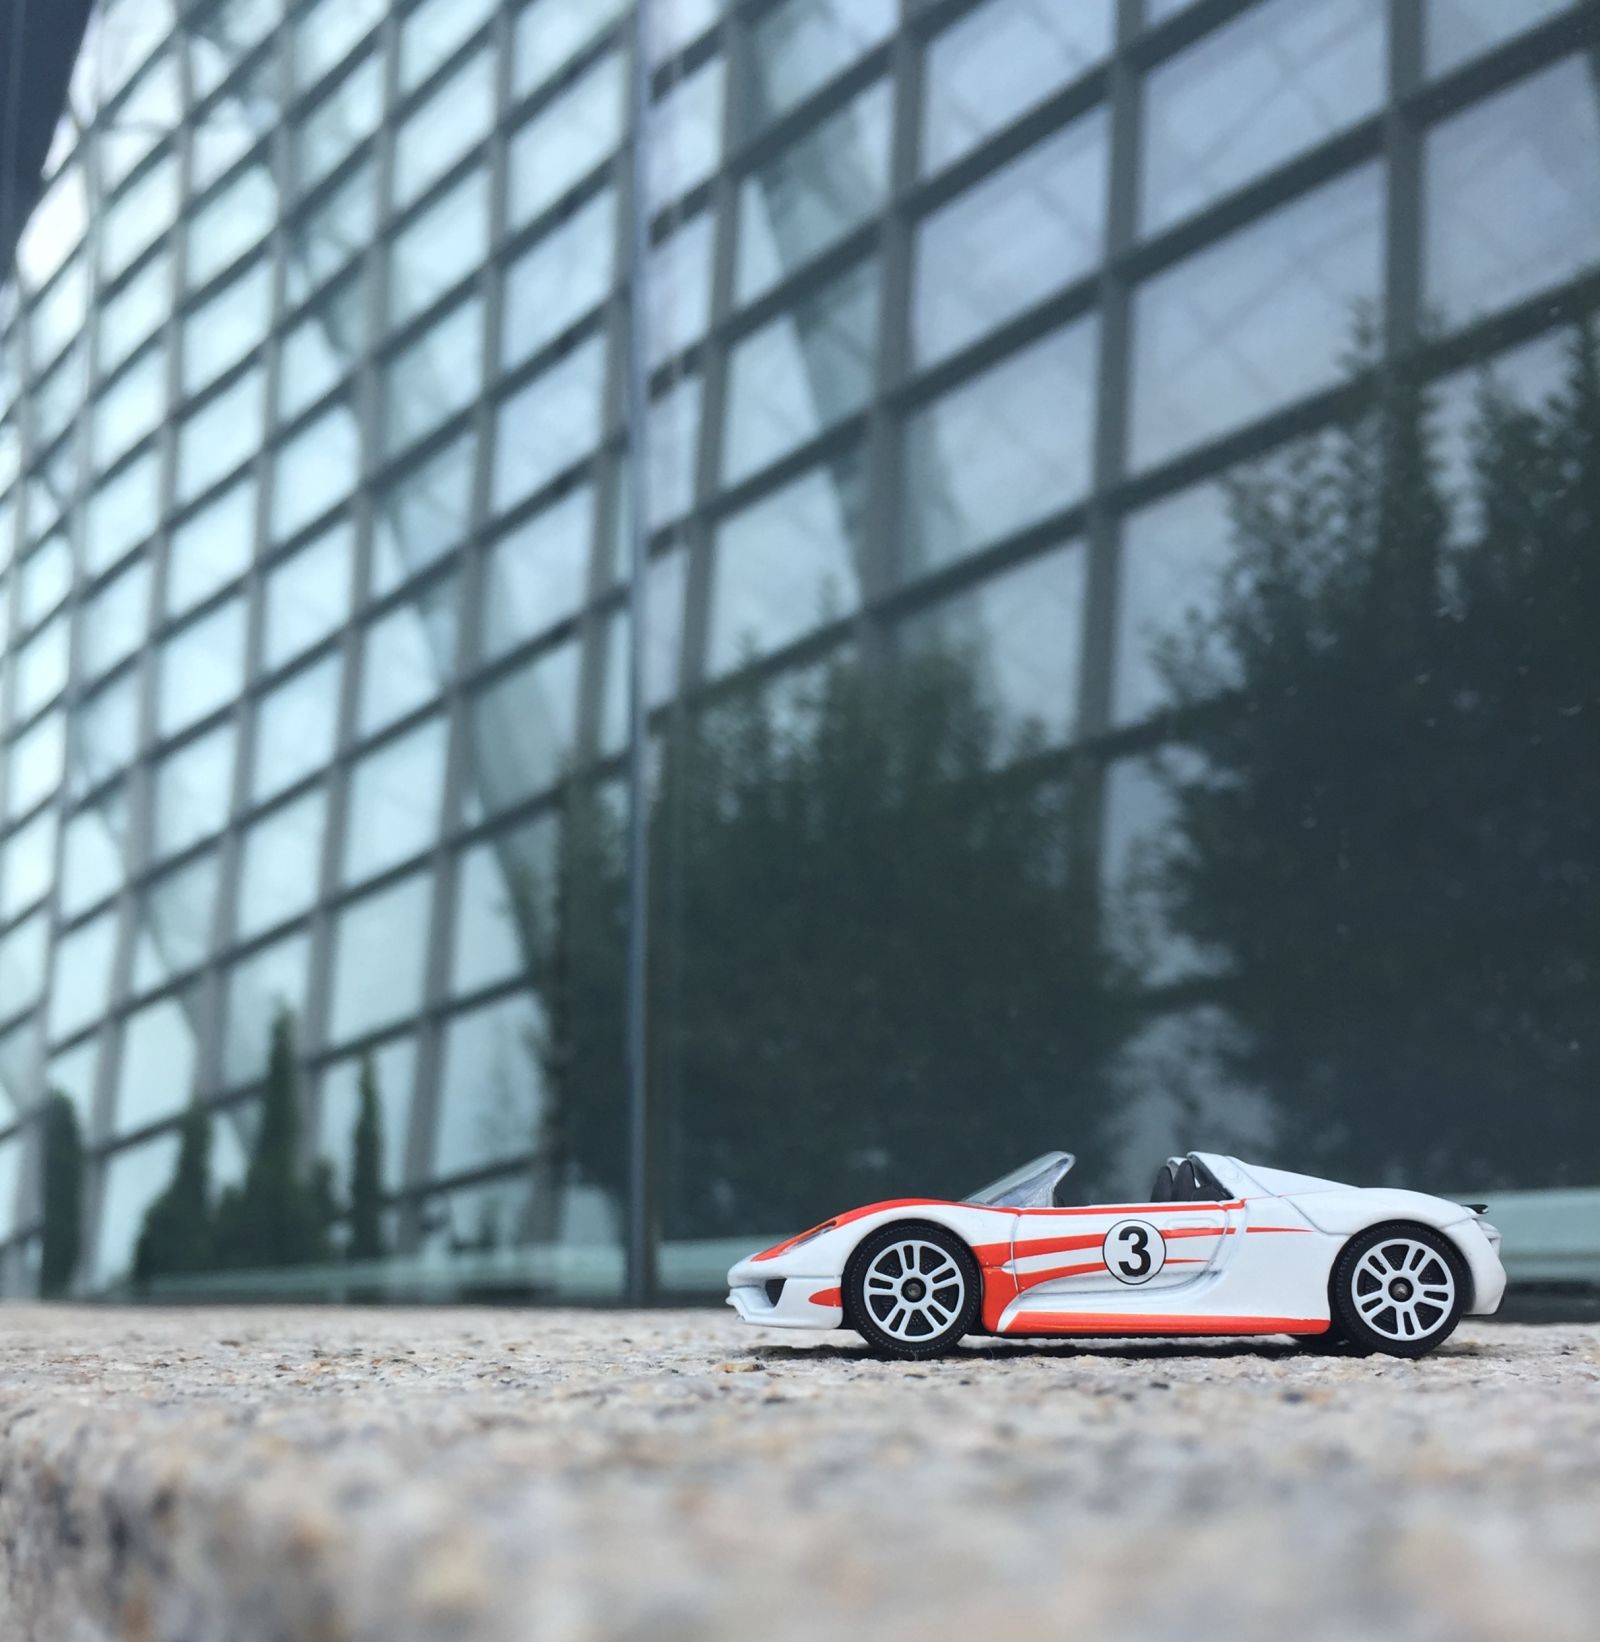 Illustration for article titled Teutonic Tuesday: Porsche 918 Spyder Weissach Package visits Gardens By the Bay